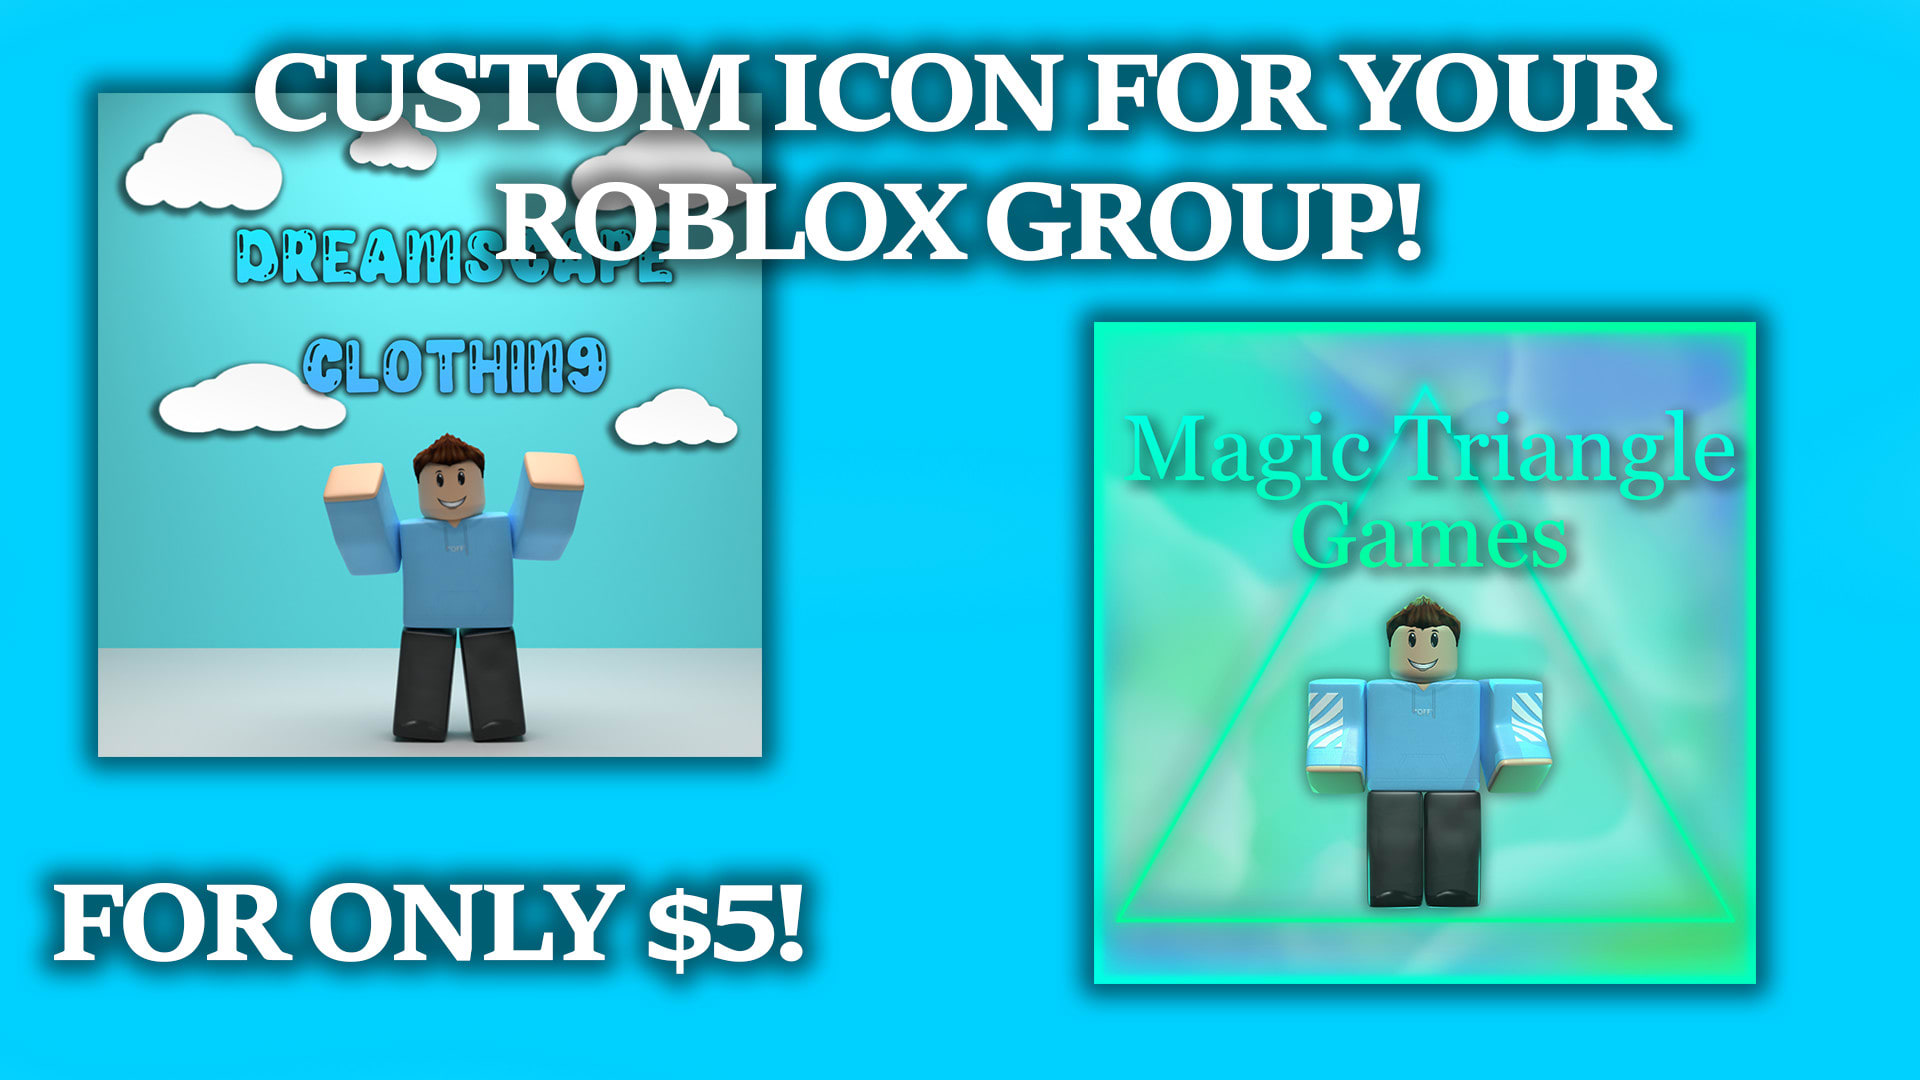 How to Make a Group in Roblox